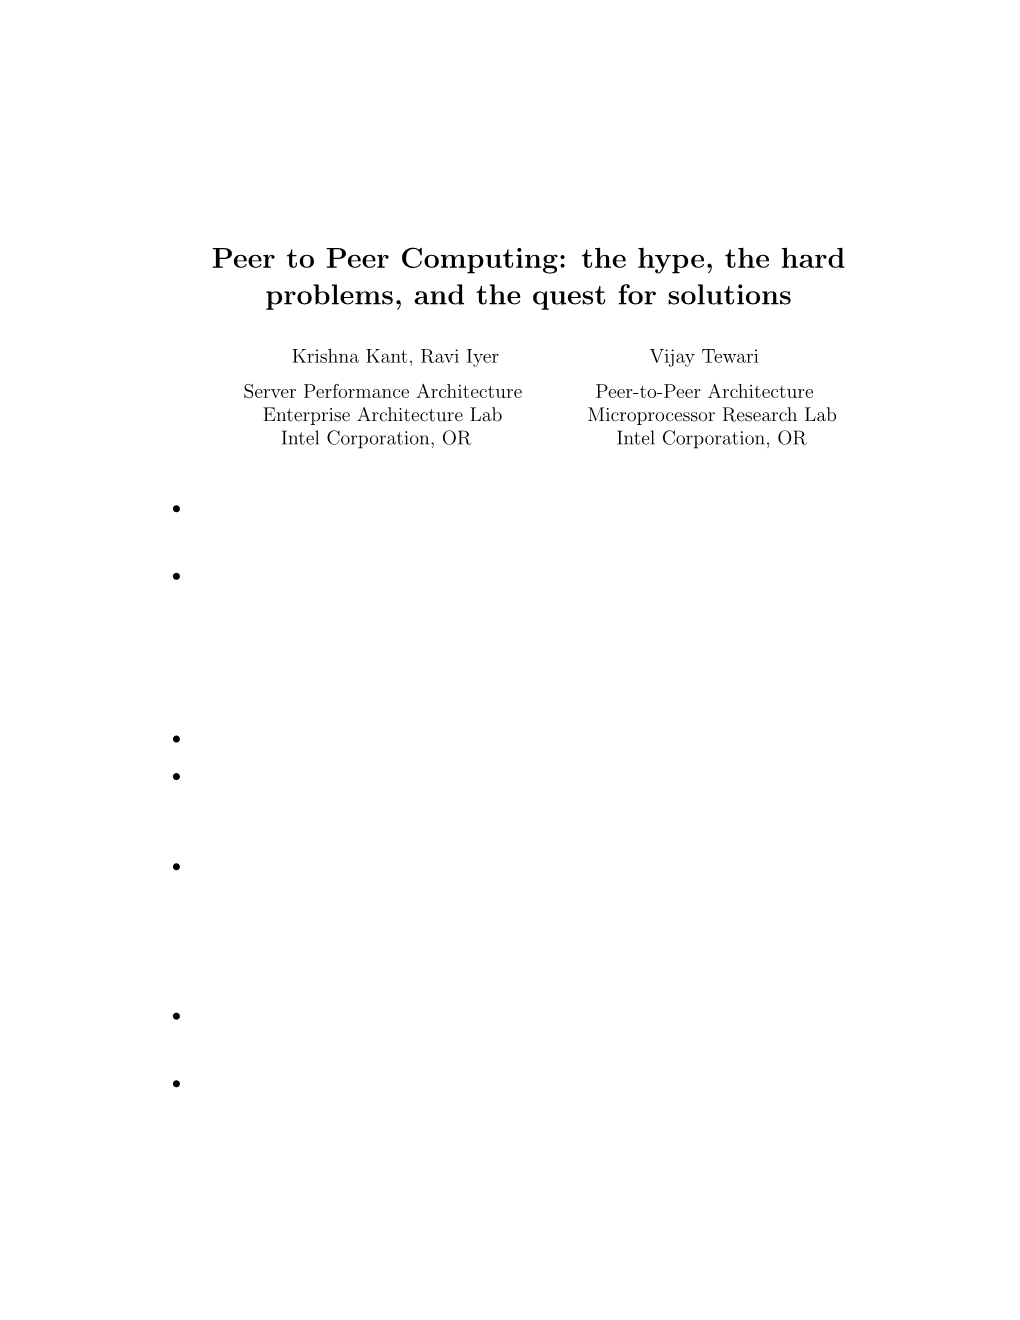 Peer to Peer Computing: the Hype, the Hard Problems, and the Quest for Solutions